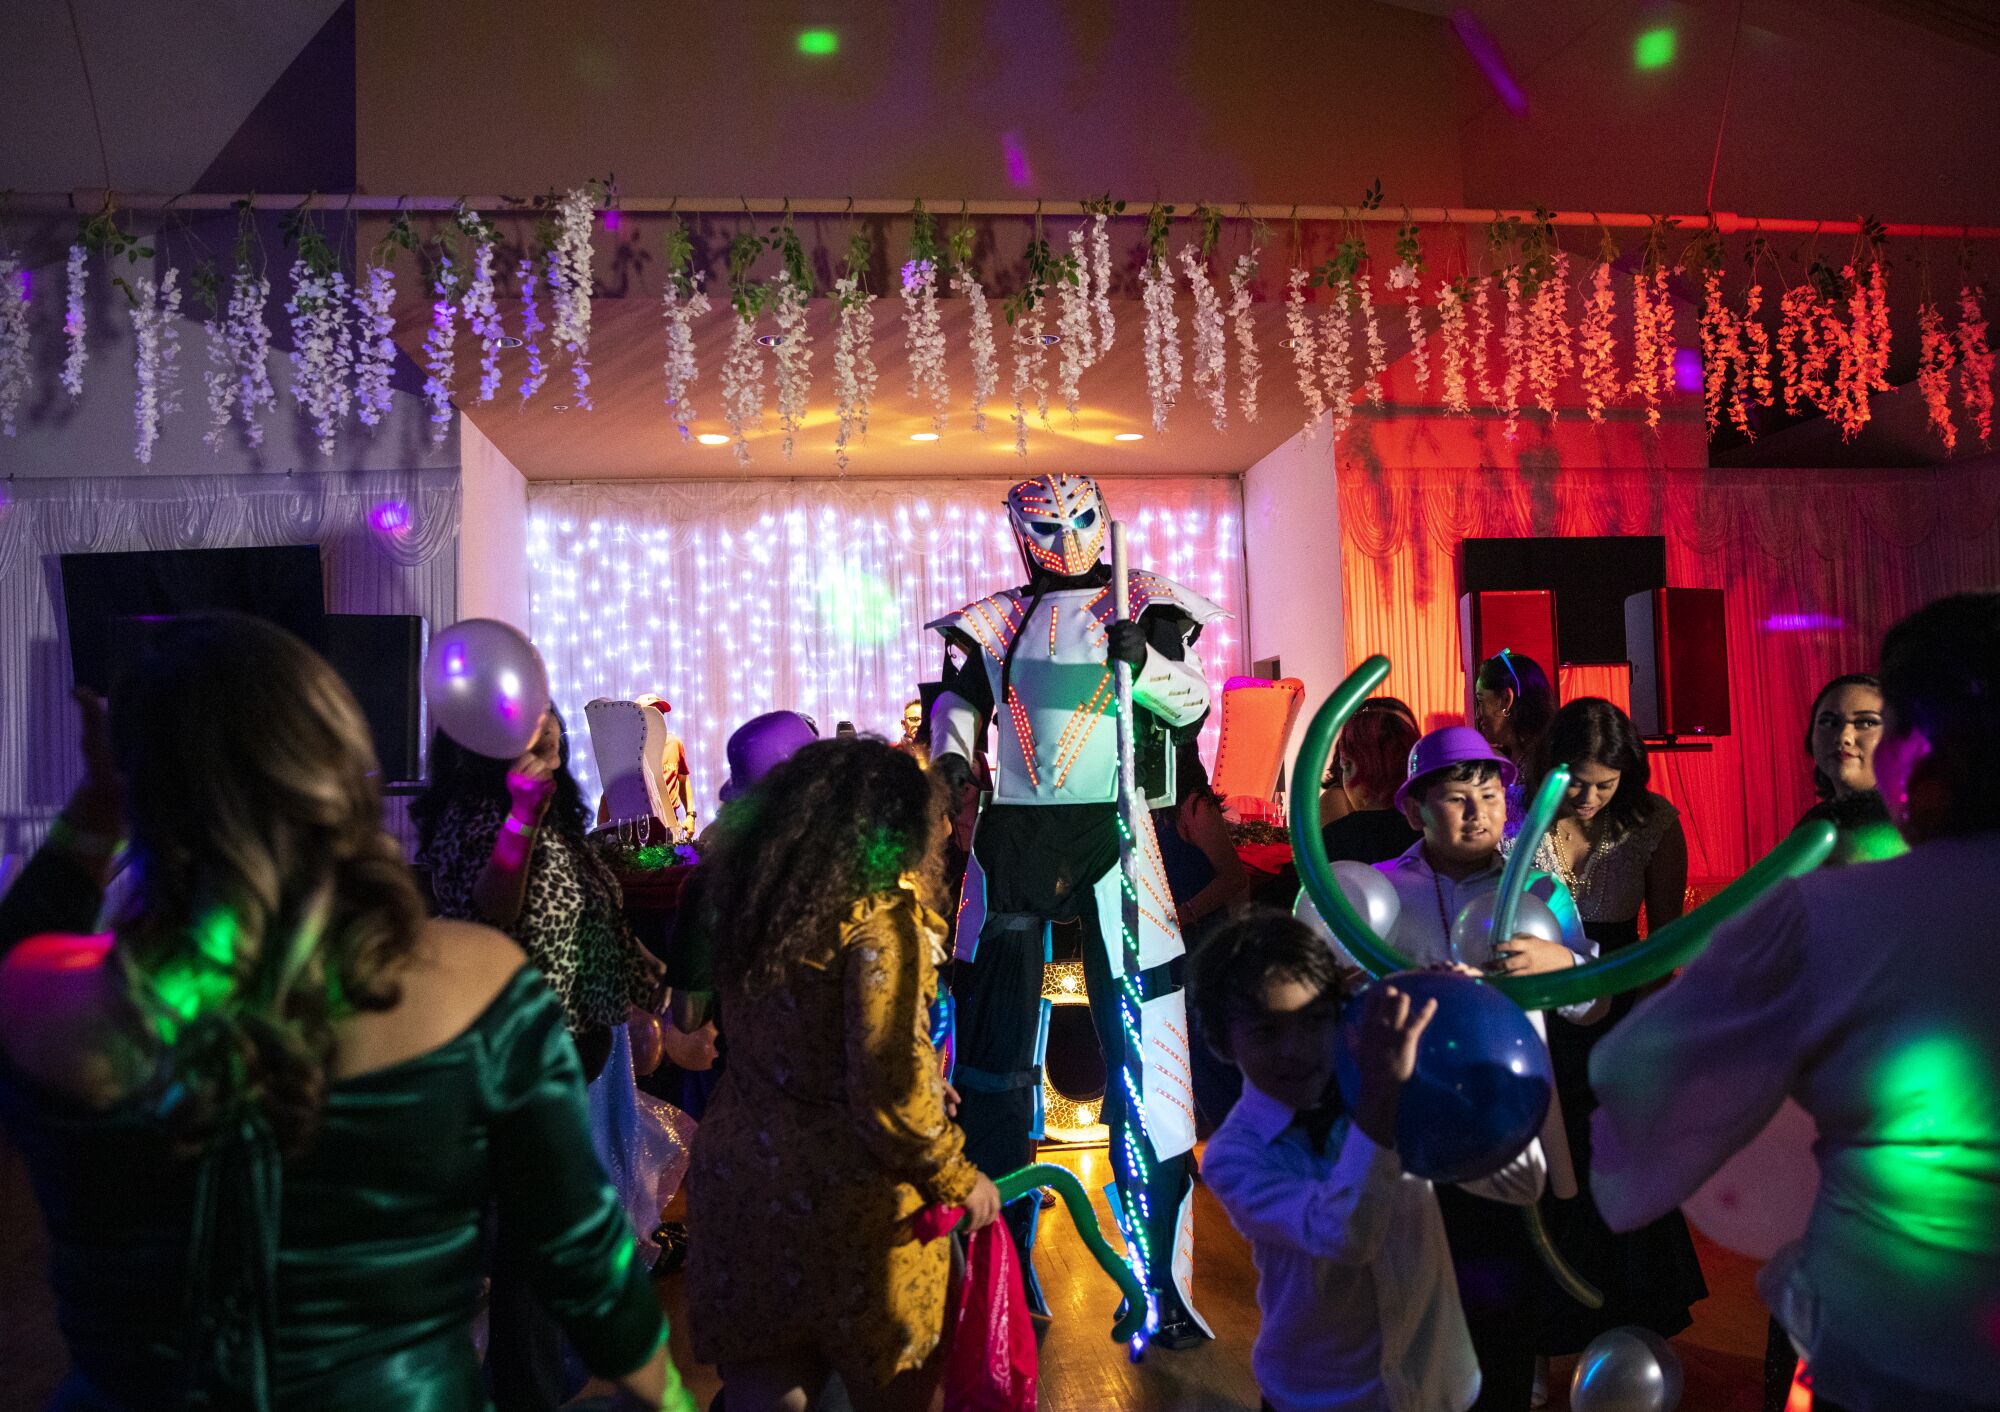 A robot surprises guests with balloons during a Twilight themed quinceanera at the Silverado Ballroom.